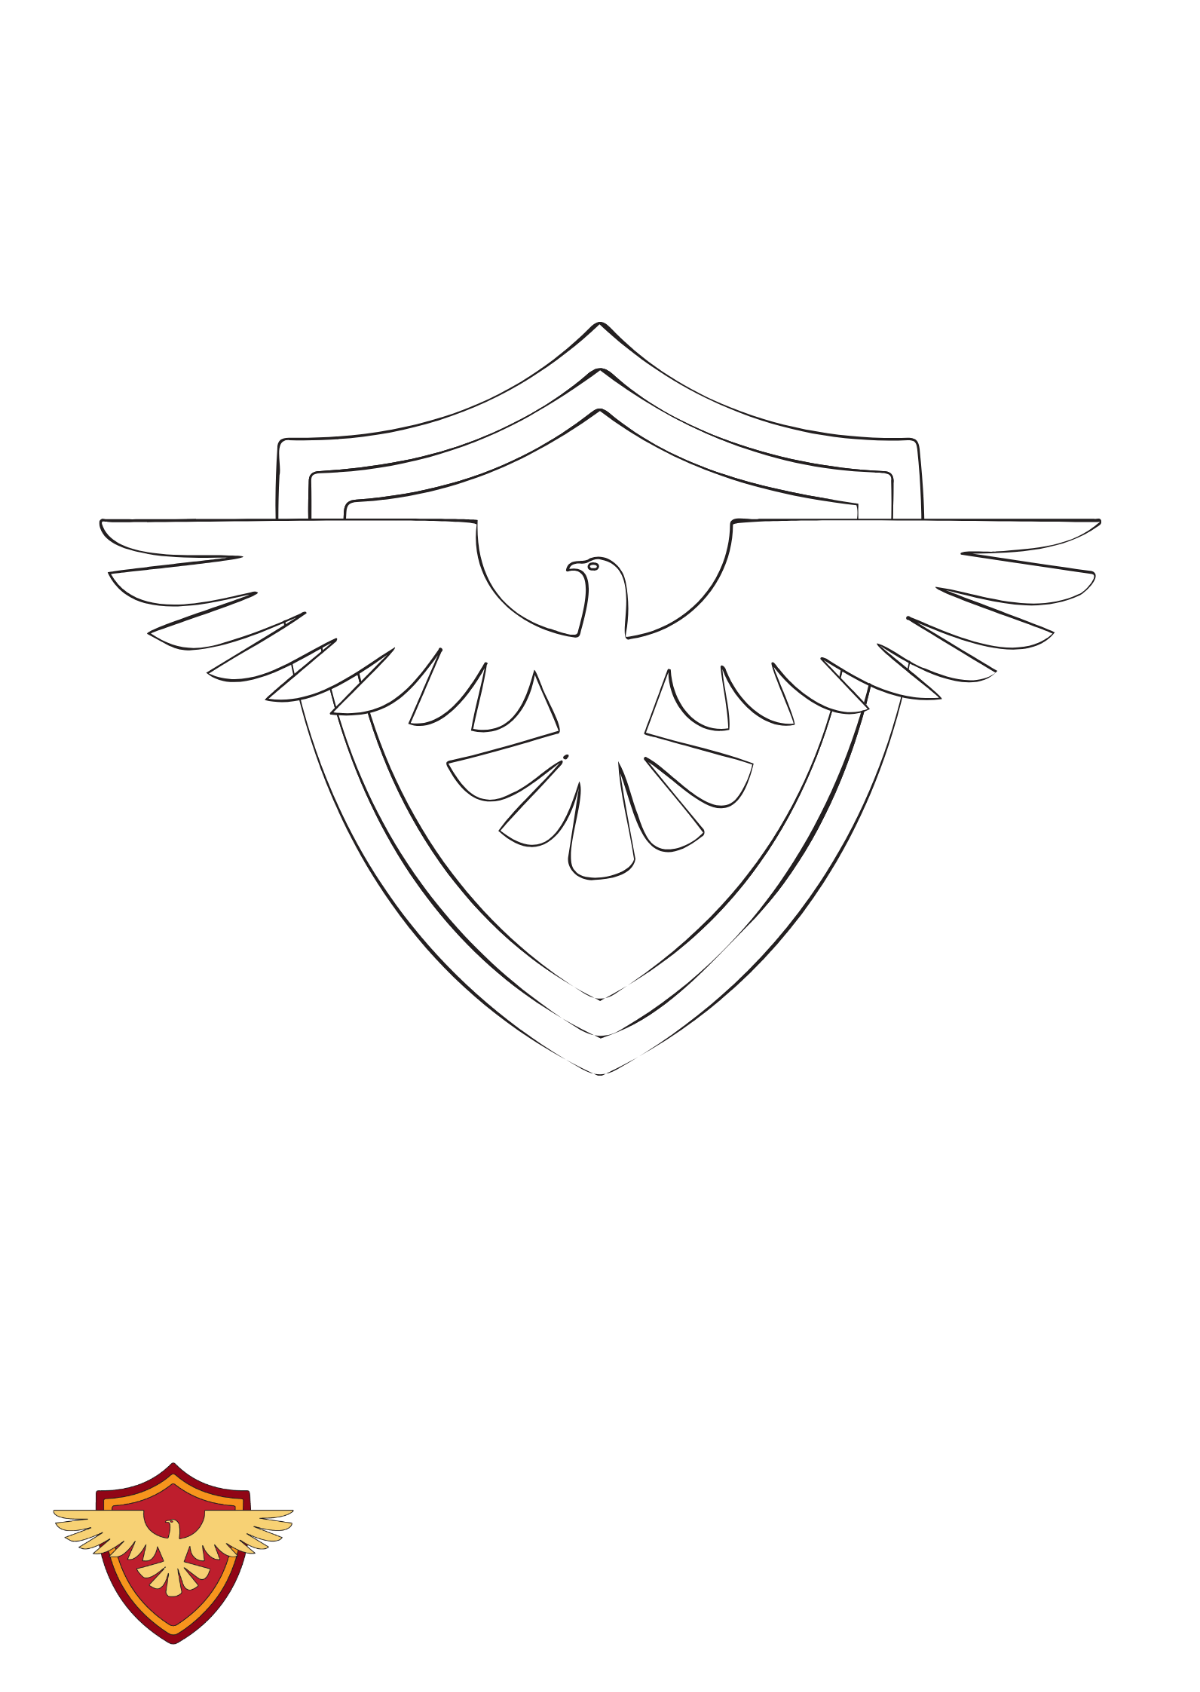 Eagle Shield coloring page Template